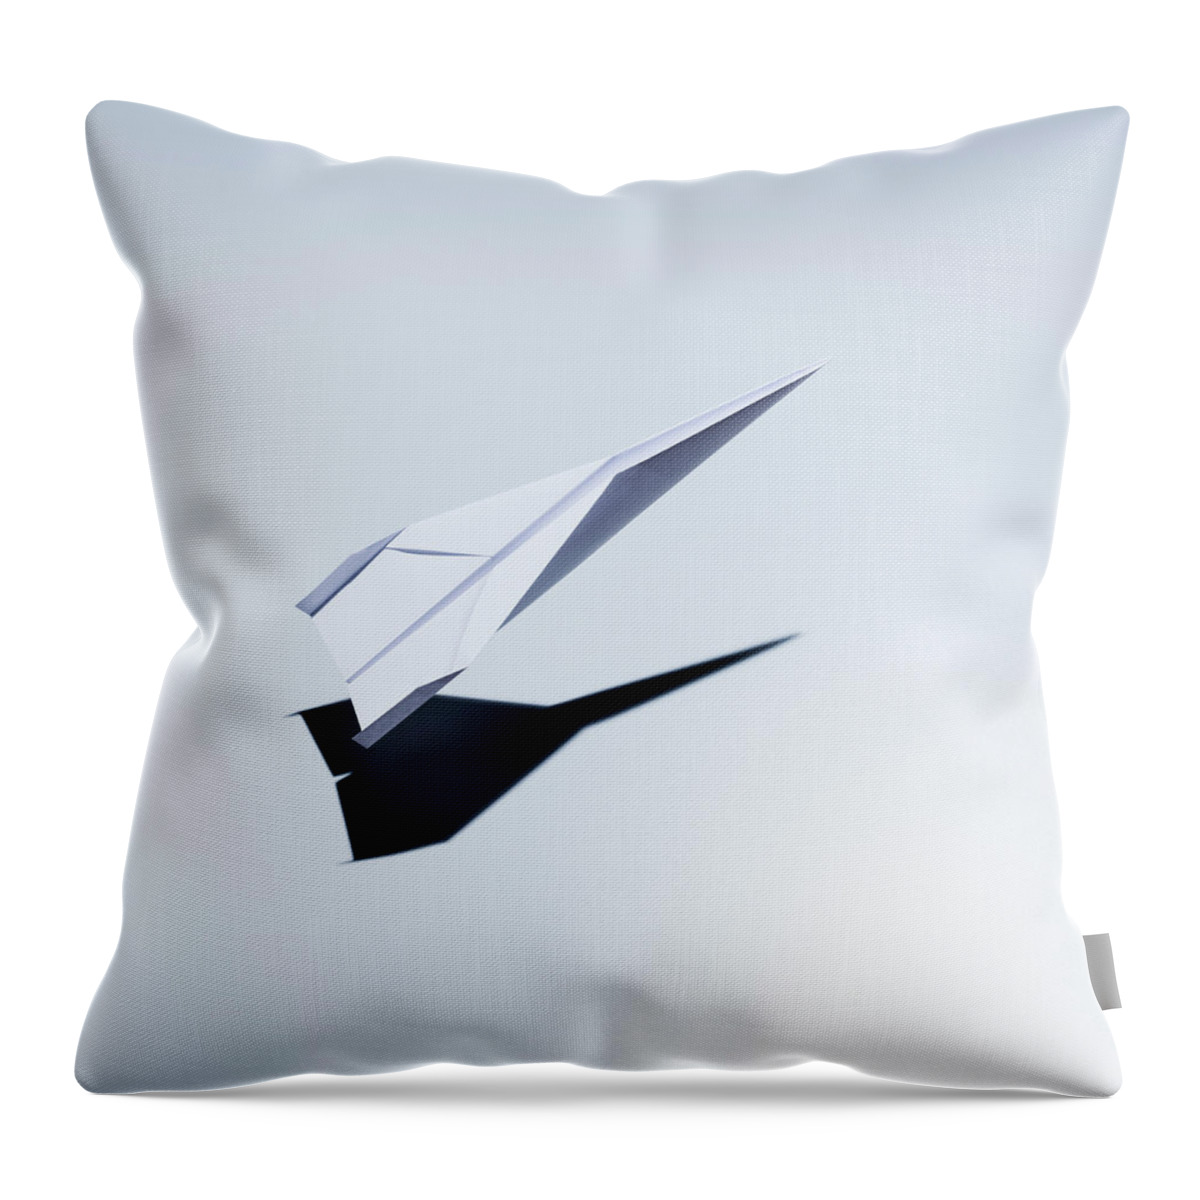 Taking Off Throw Pillow featuring the photograph Paper Plane Taking Off by Jorg Greuel